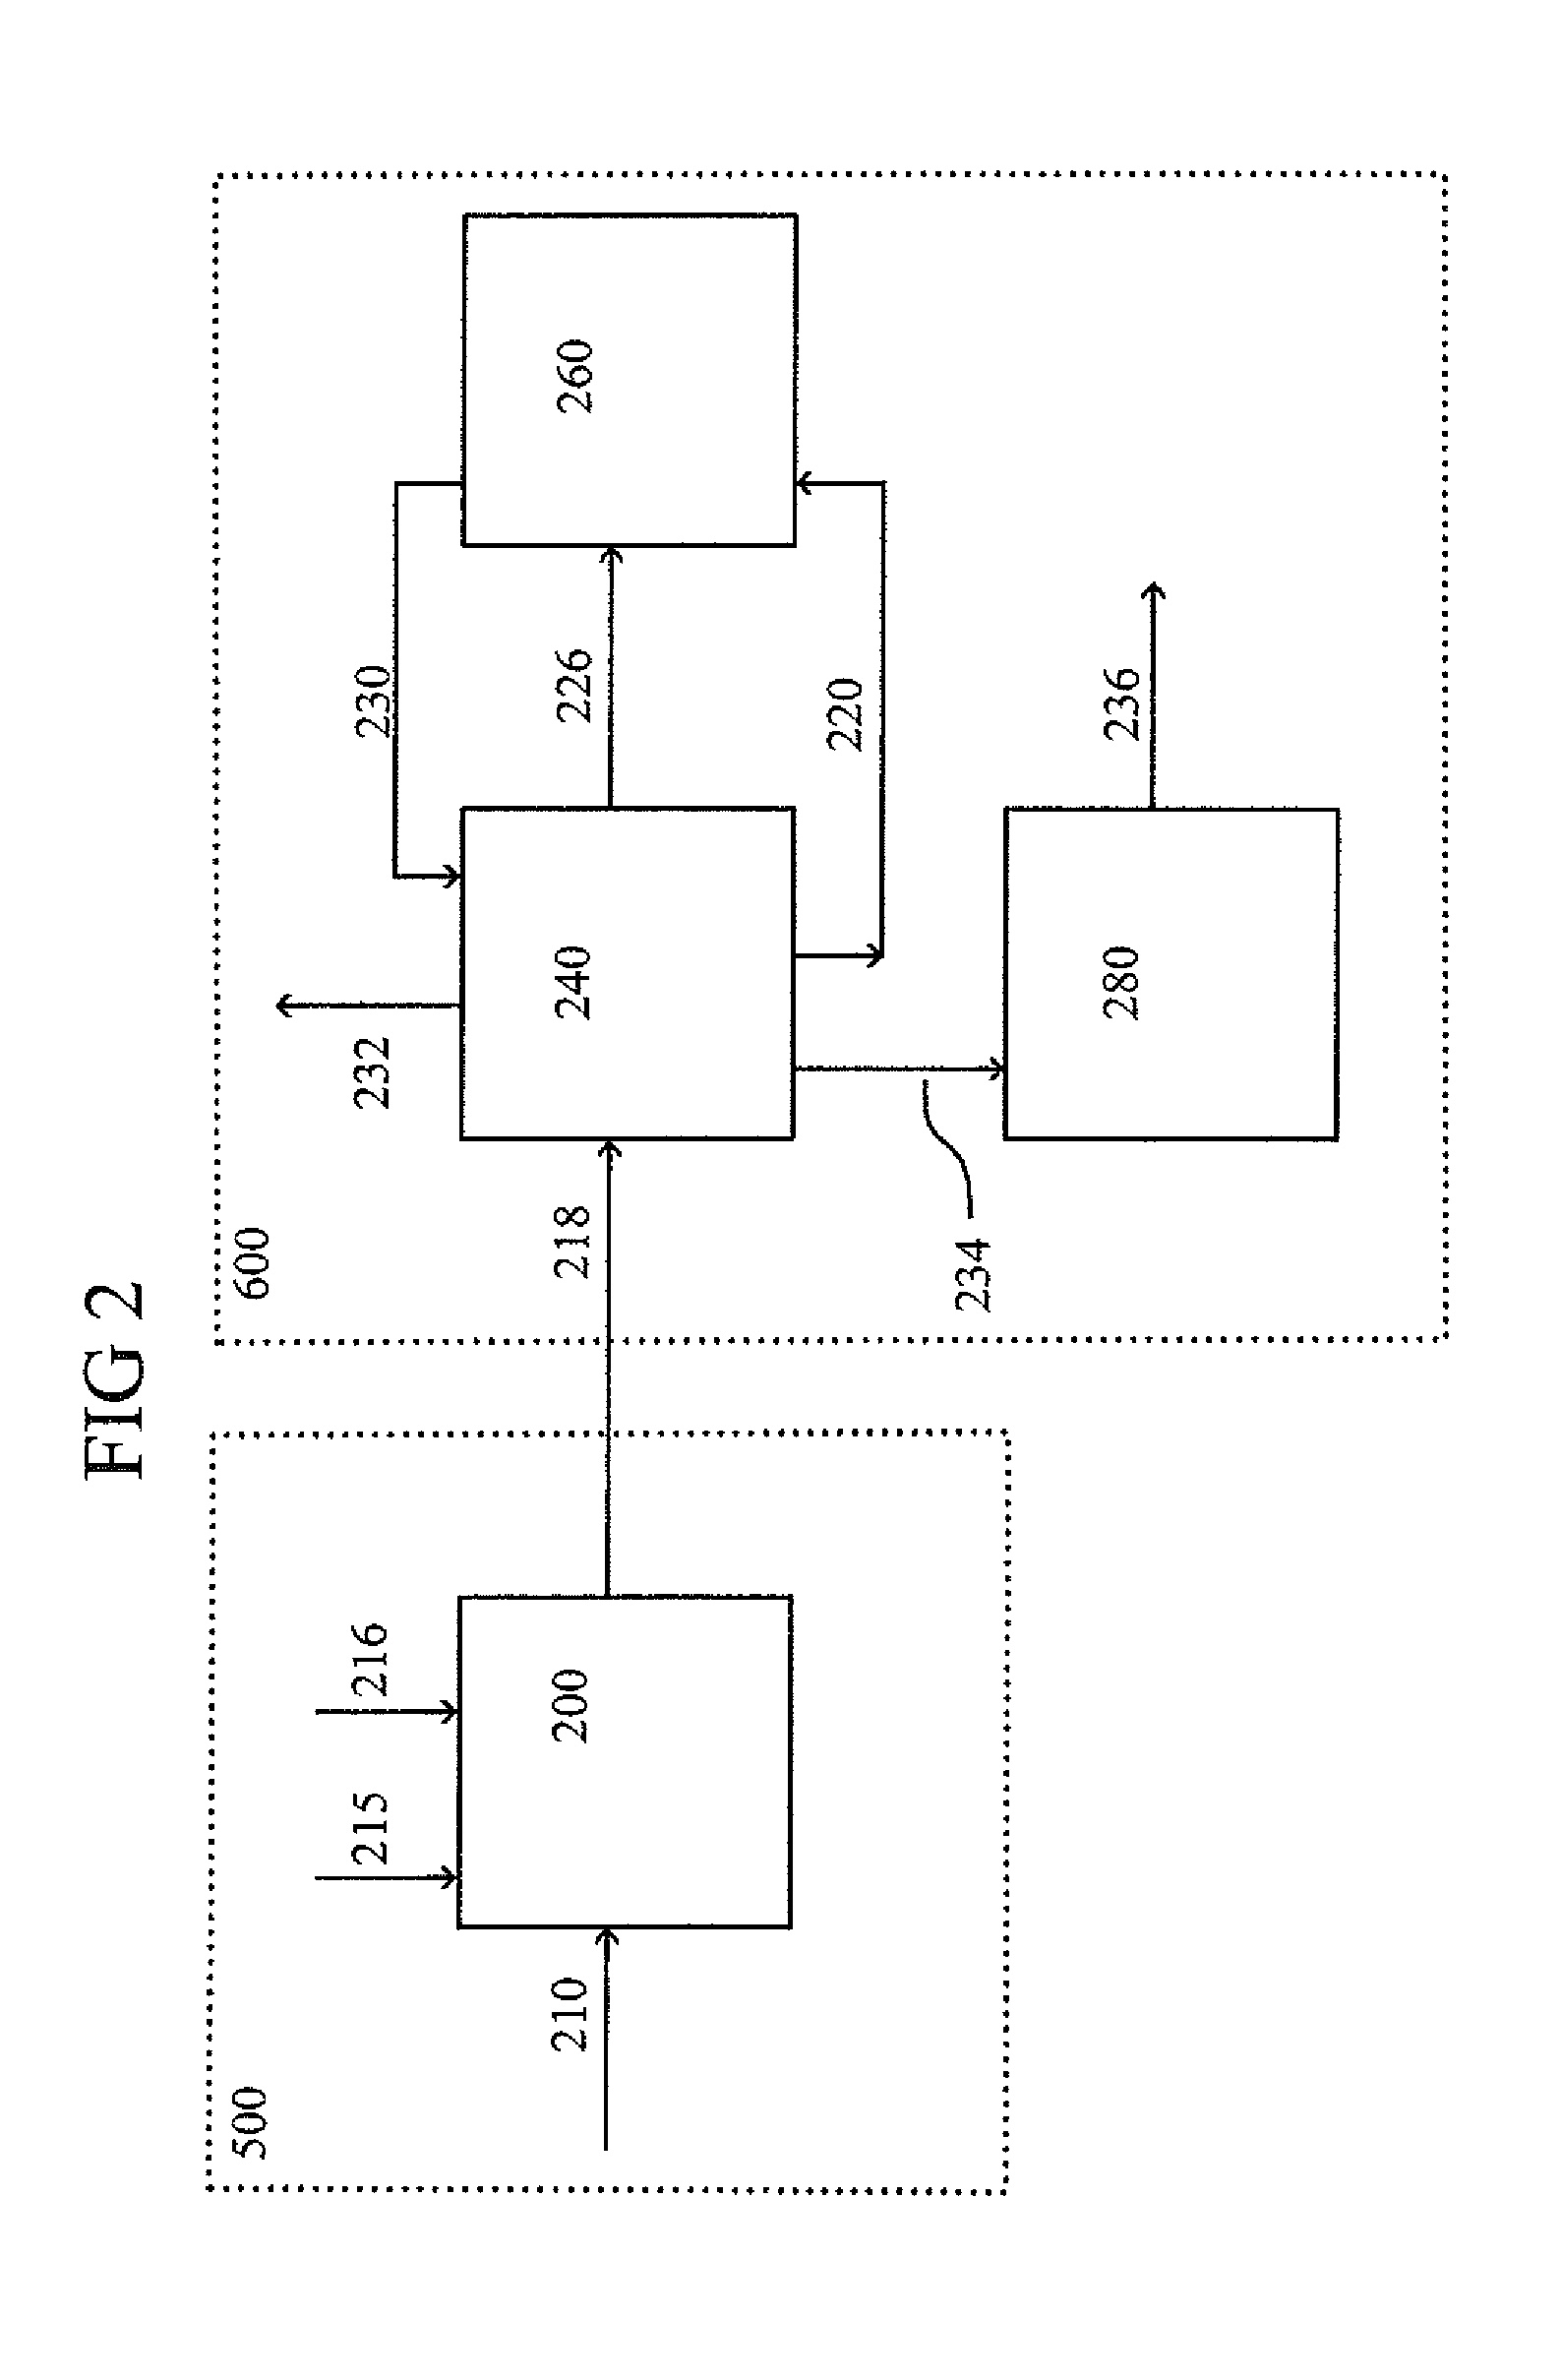 Process for toluene and methane coupling in a microreactor